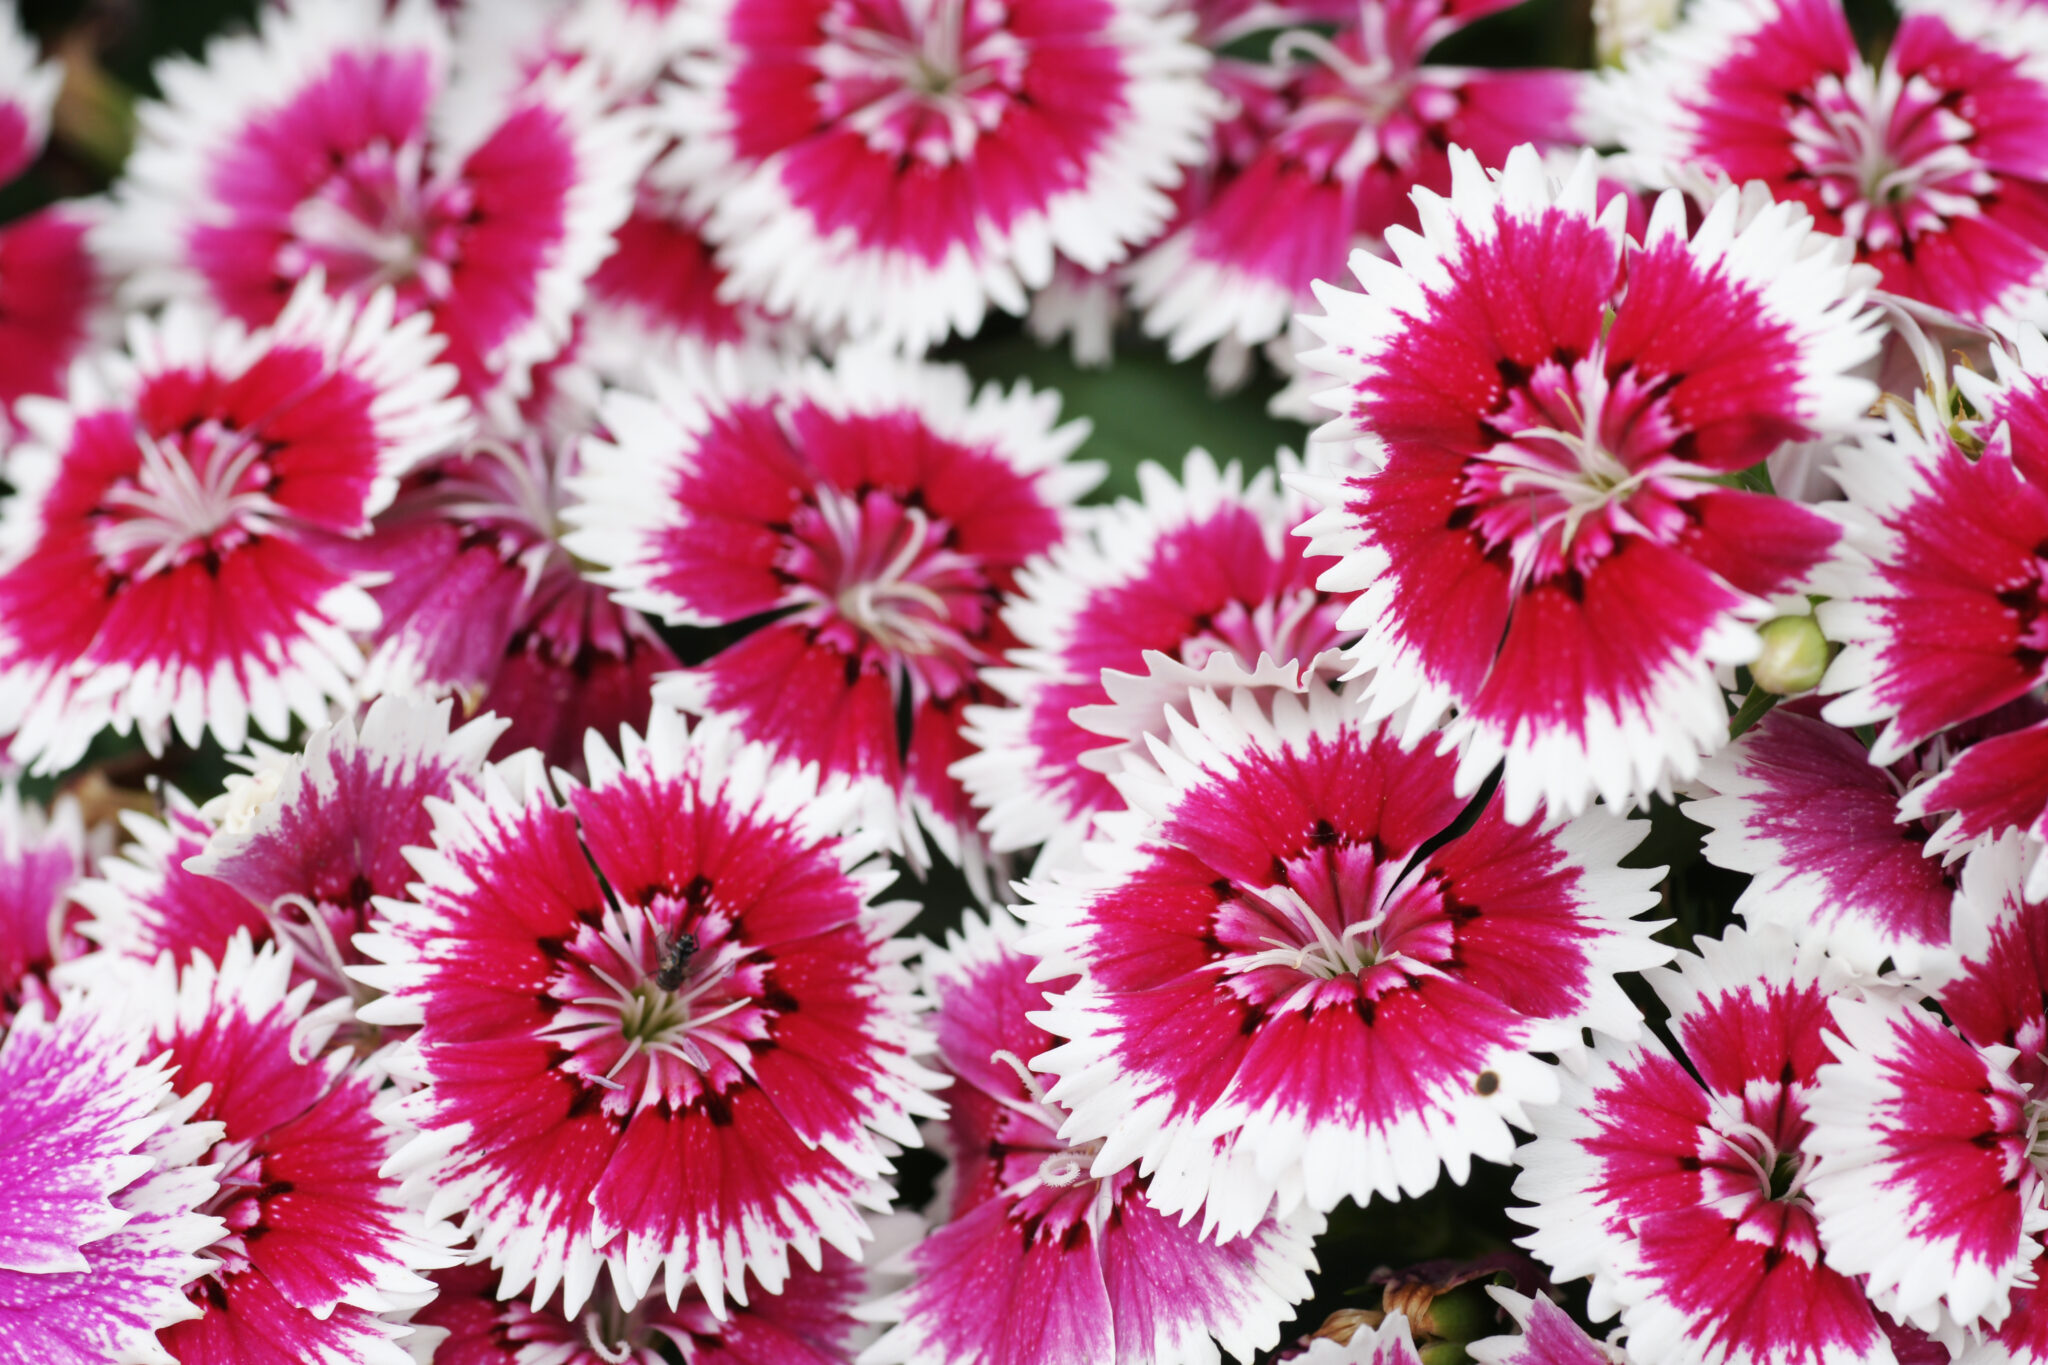 75 Plants With Pink Flowers: Names, Identifying, Gardening Tips